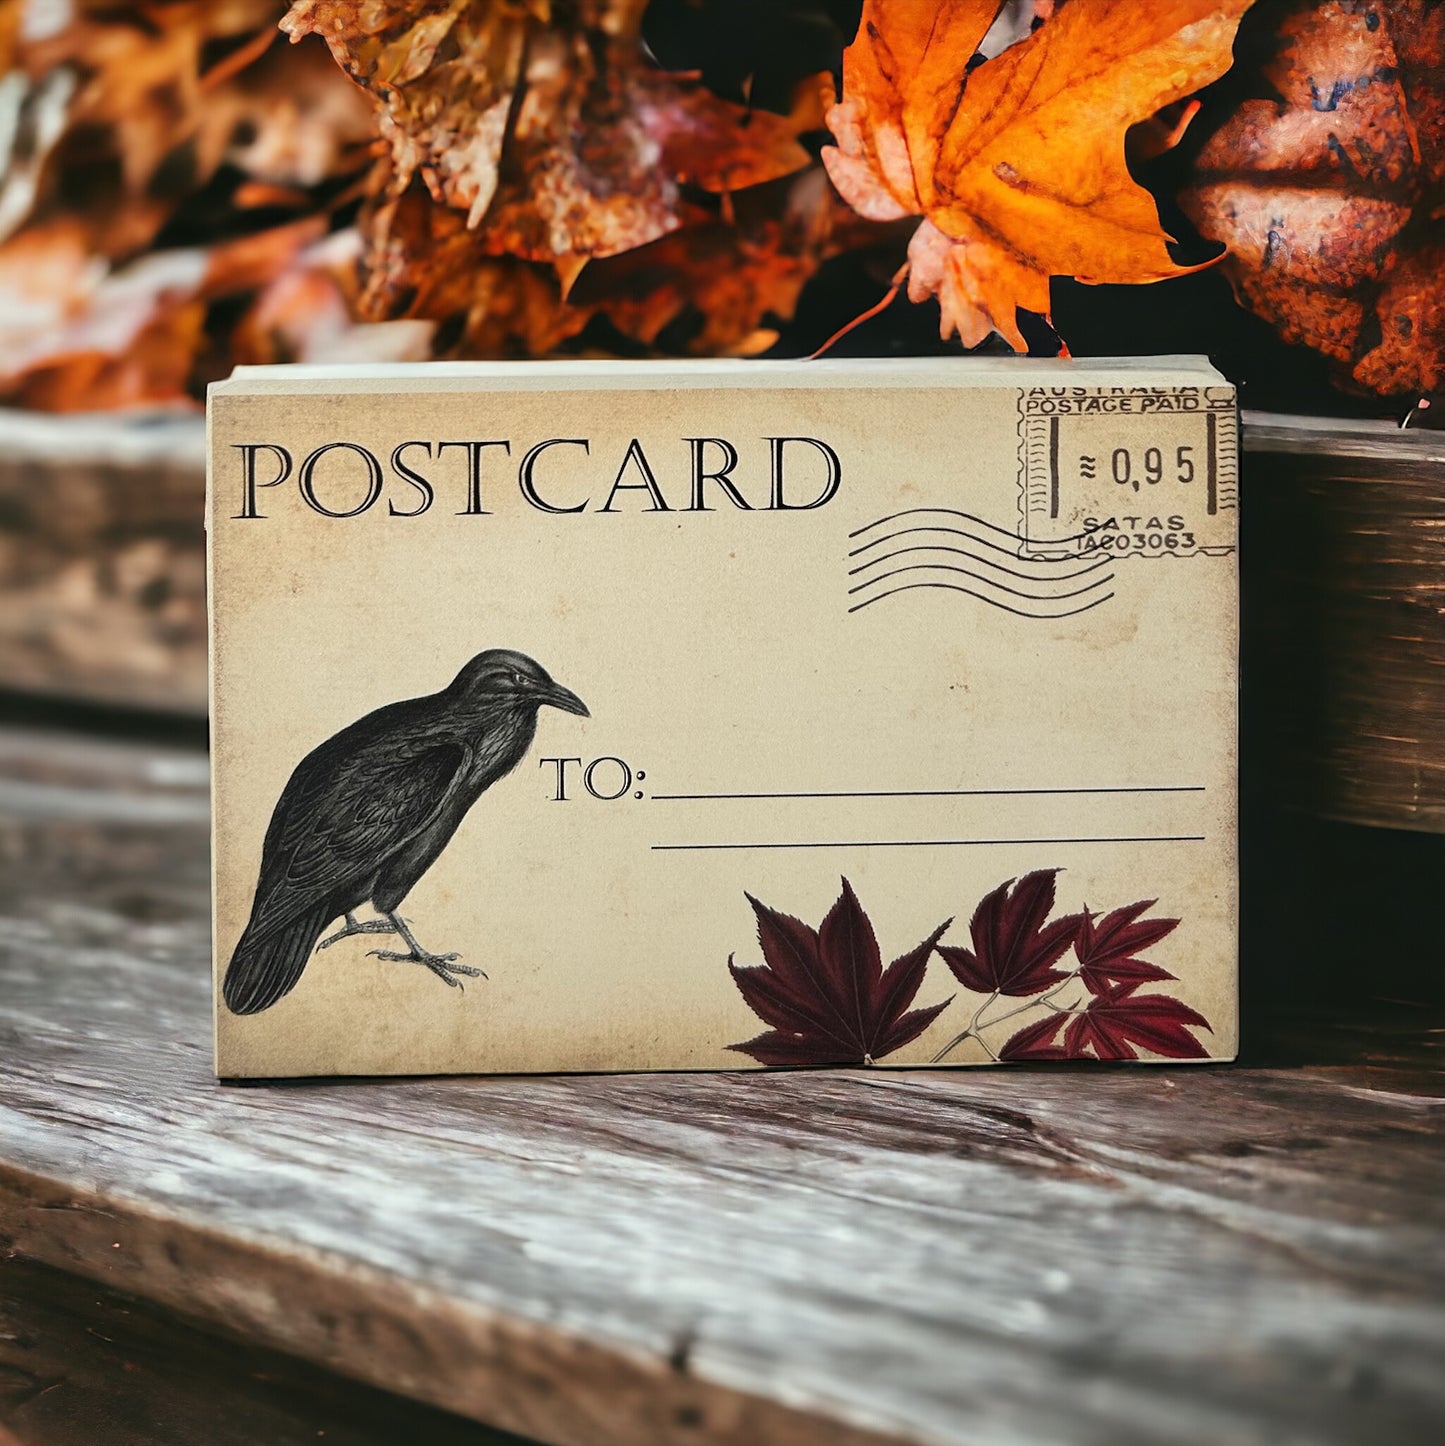 Vintage Style Wood “Postcards” - Fall/Autumn Home Accents